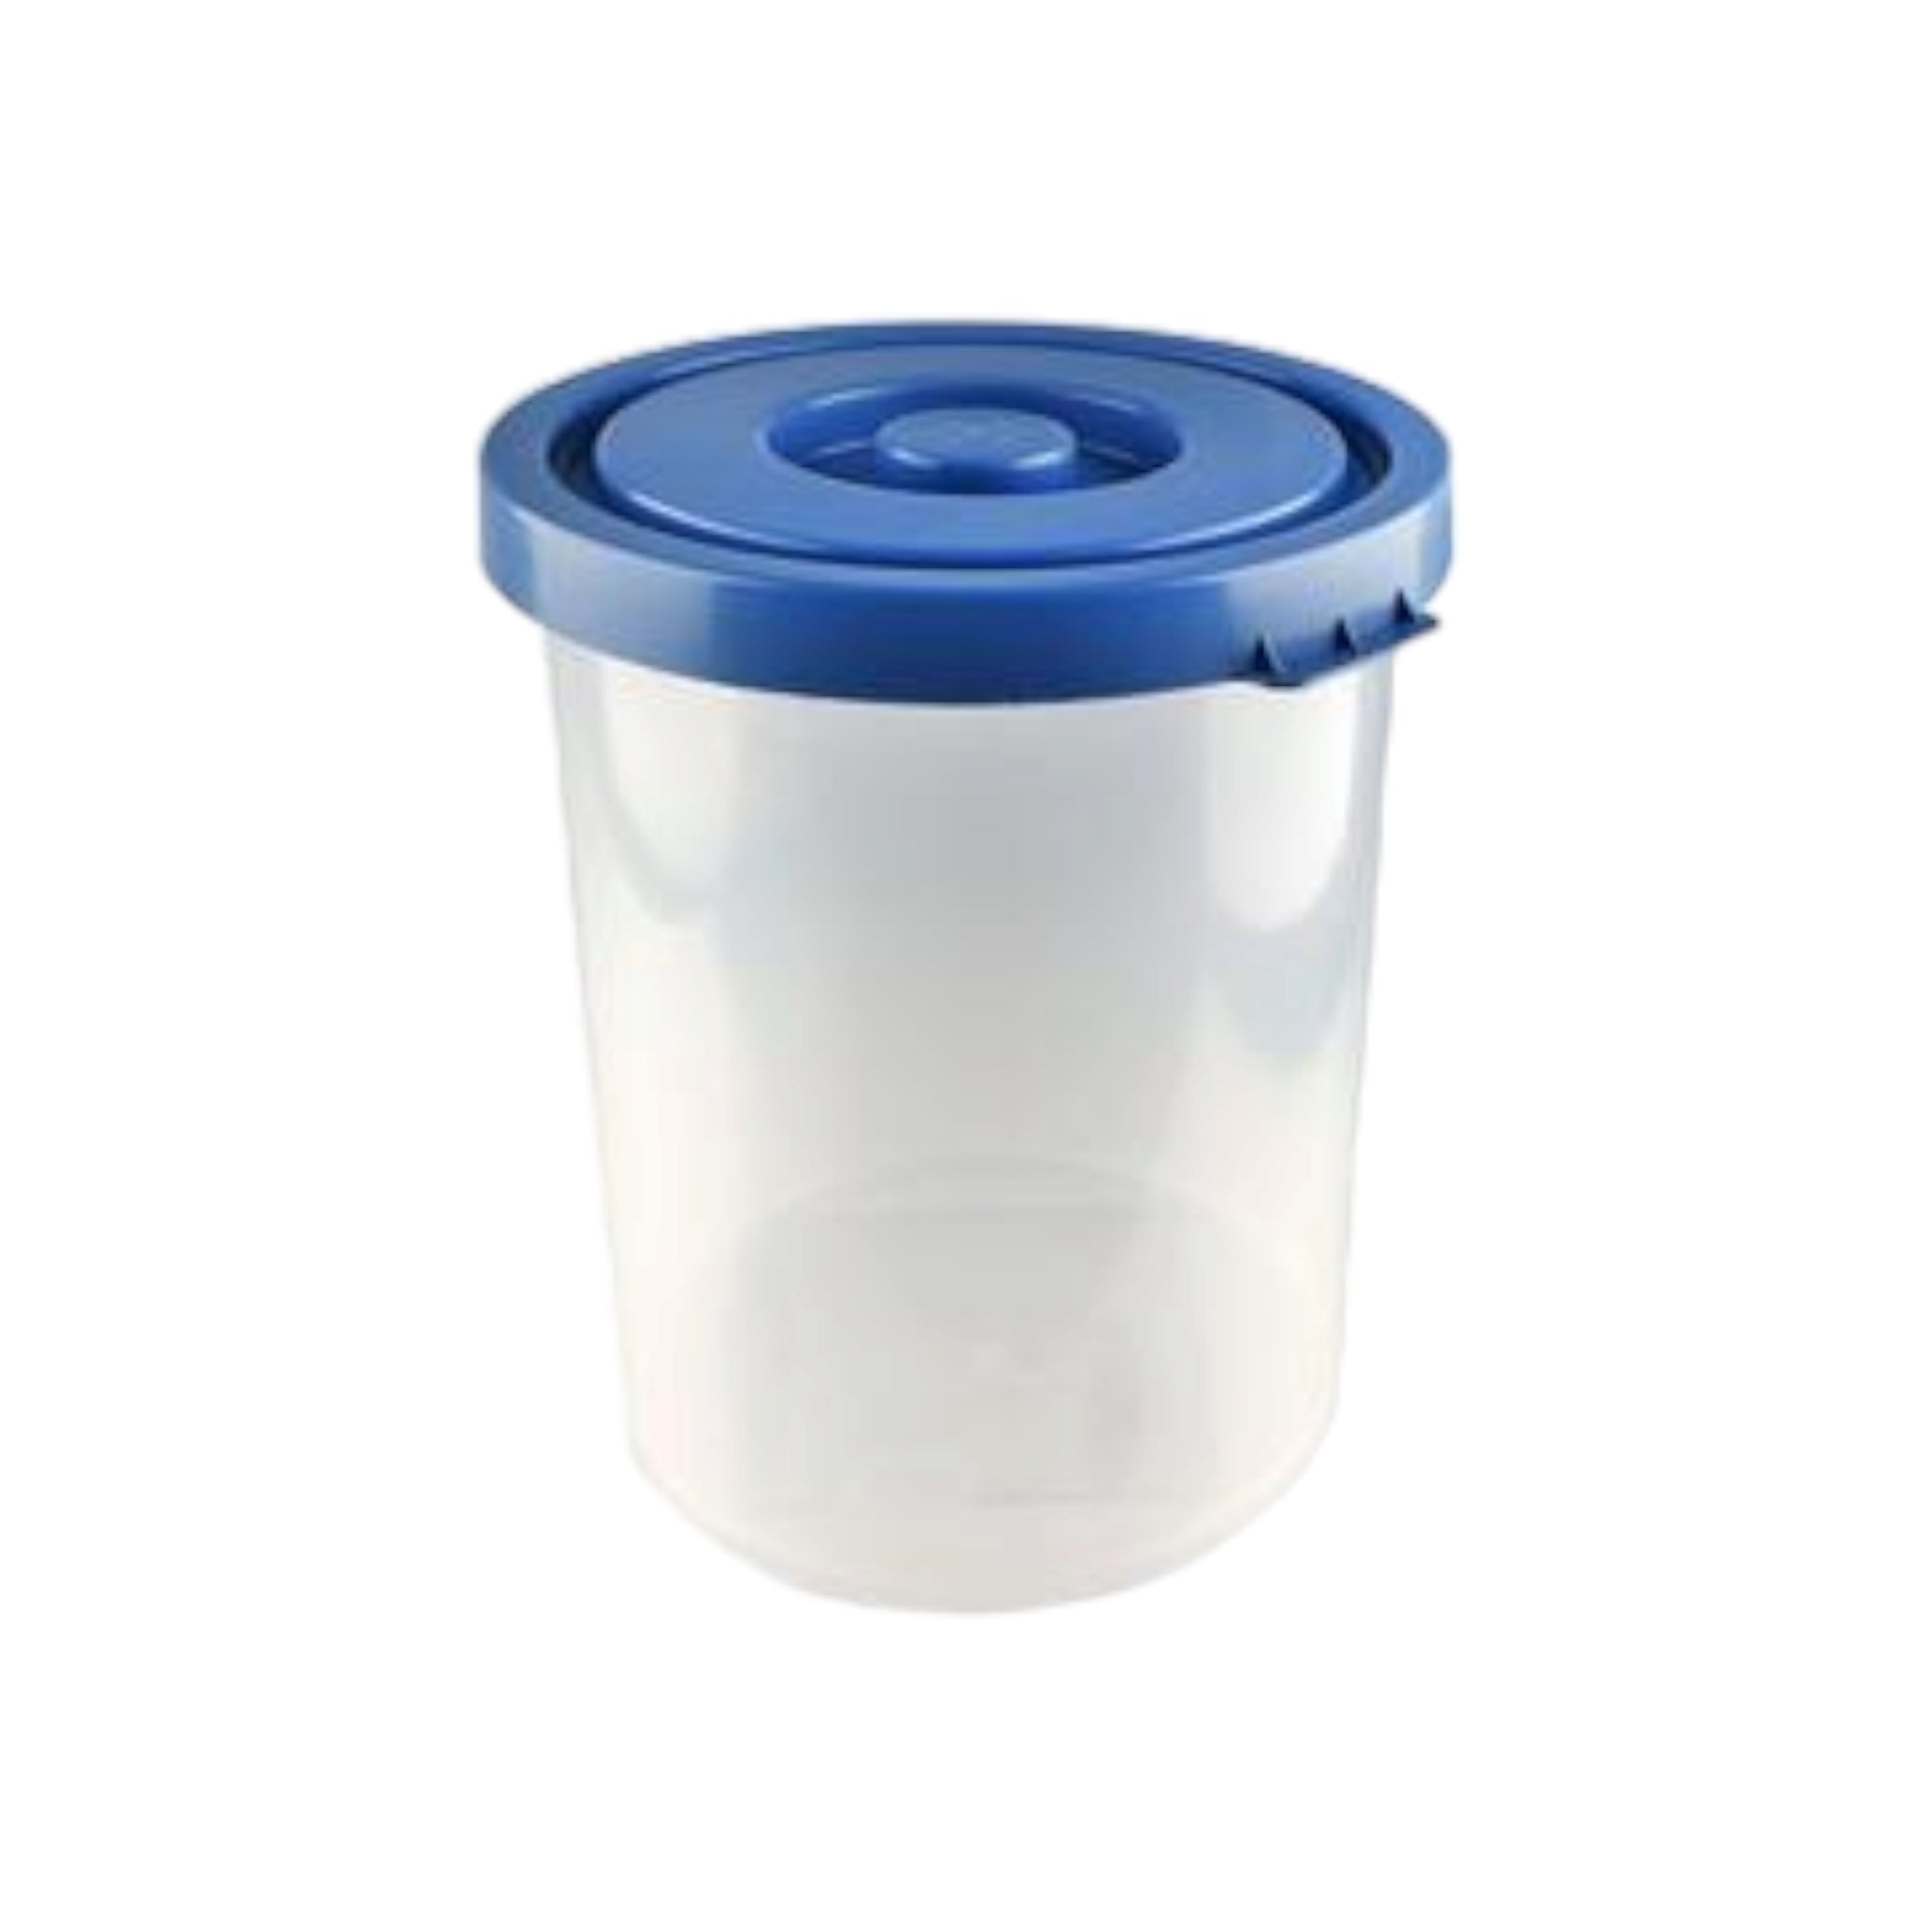 8L Dry Goods Plastic Round Utility Container Clear Base